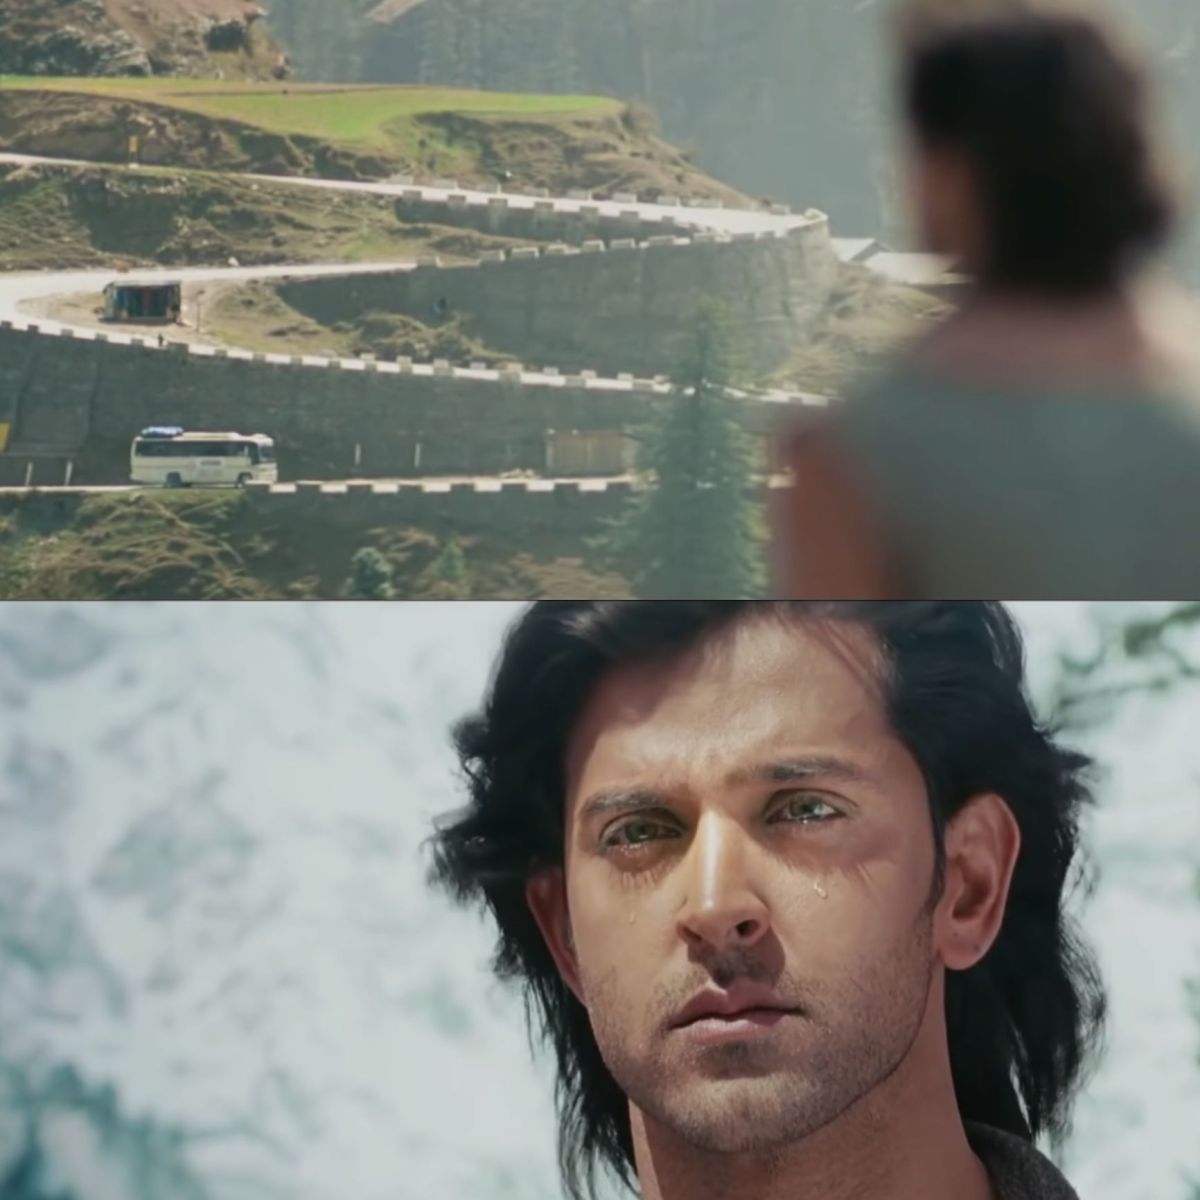 krrish hrithik roshan in tears while looking at a bus meme template